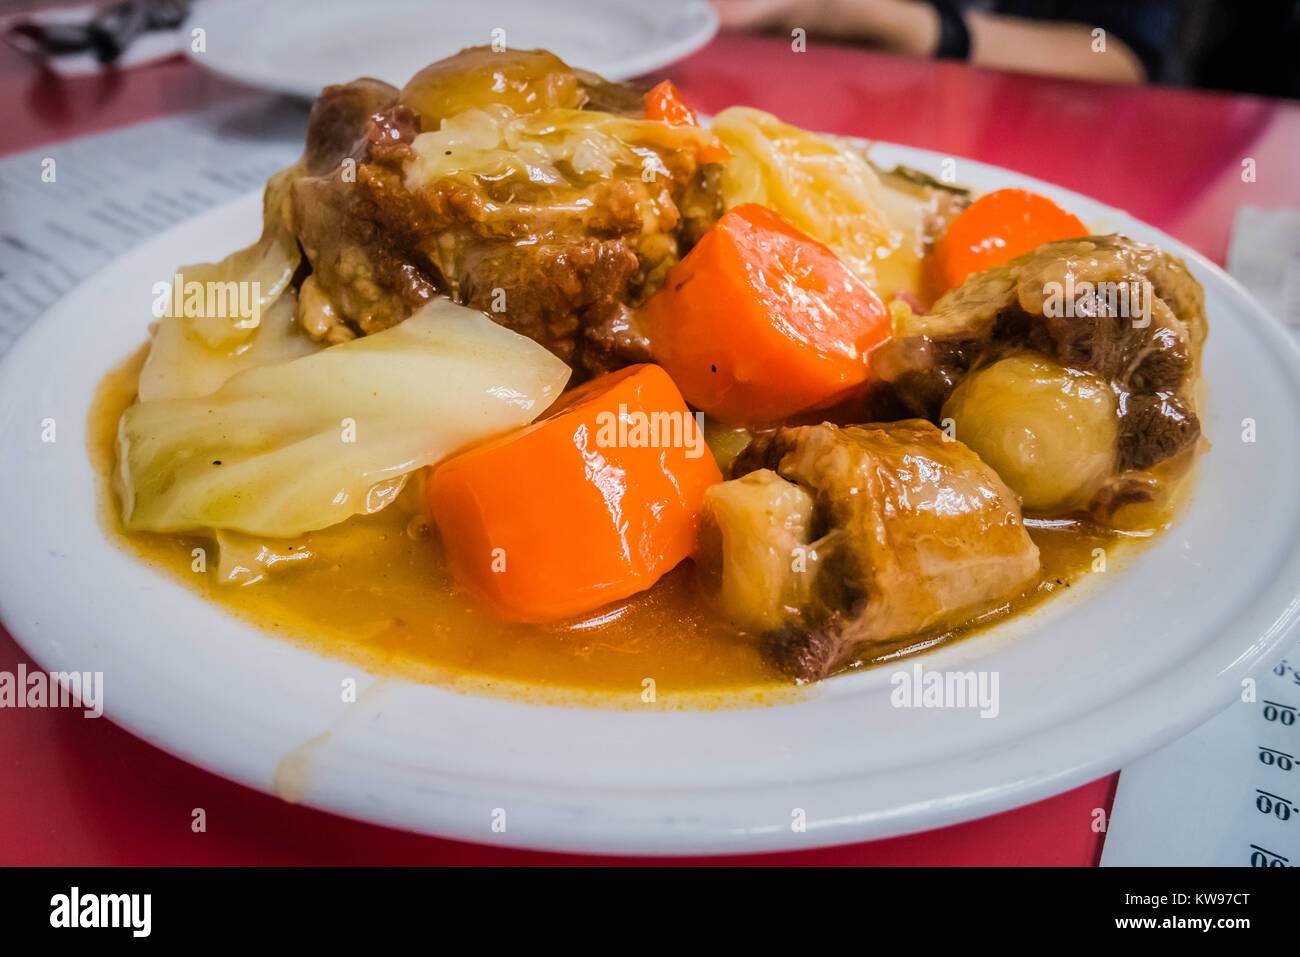 oxtail stew with cabbage and carrot Stock Photo